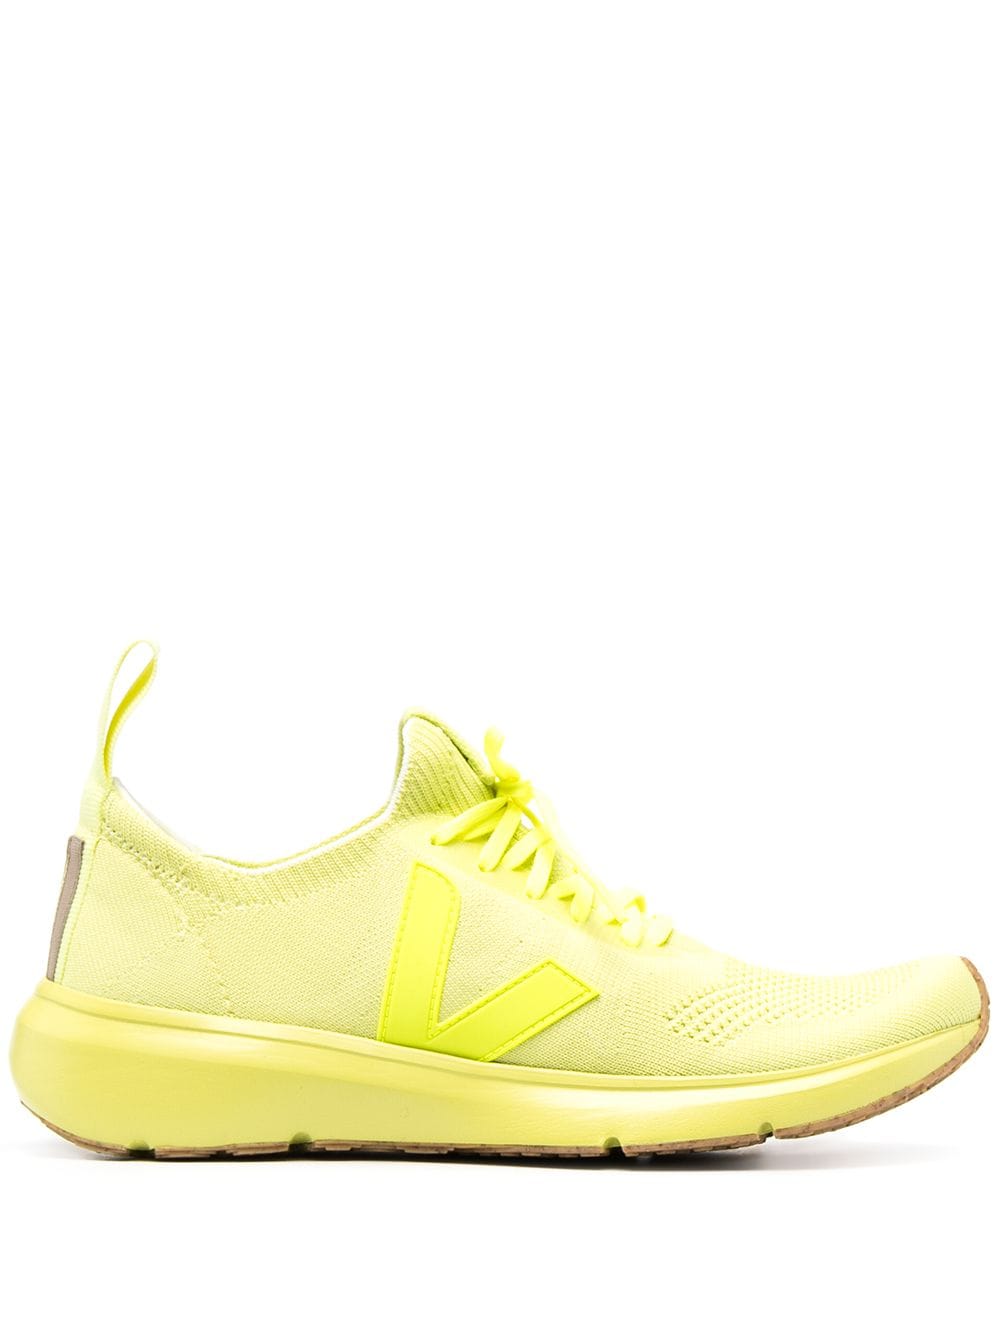 Rick Owens X VEJA Runner Style 2 sneakers - Yellow